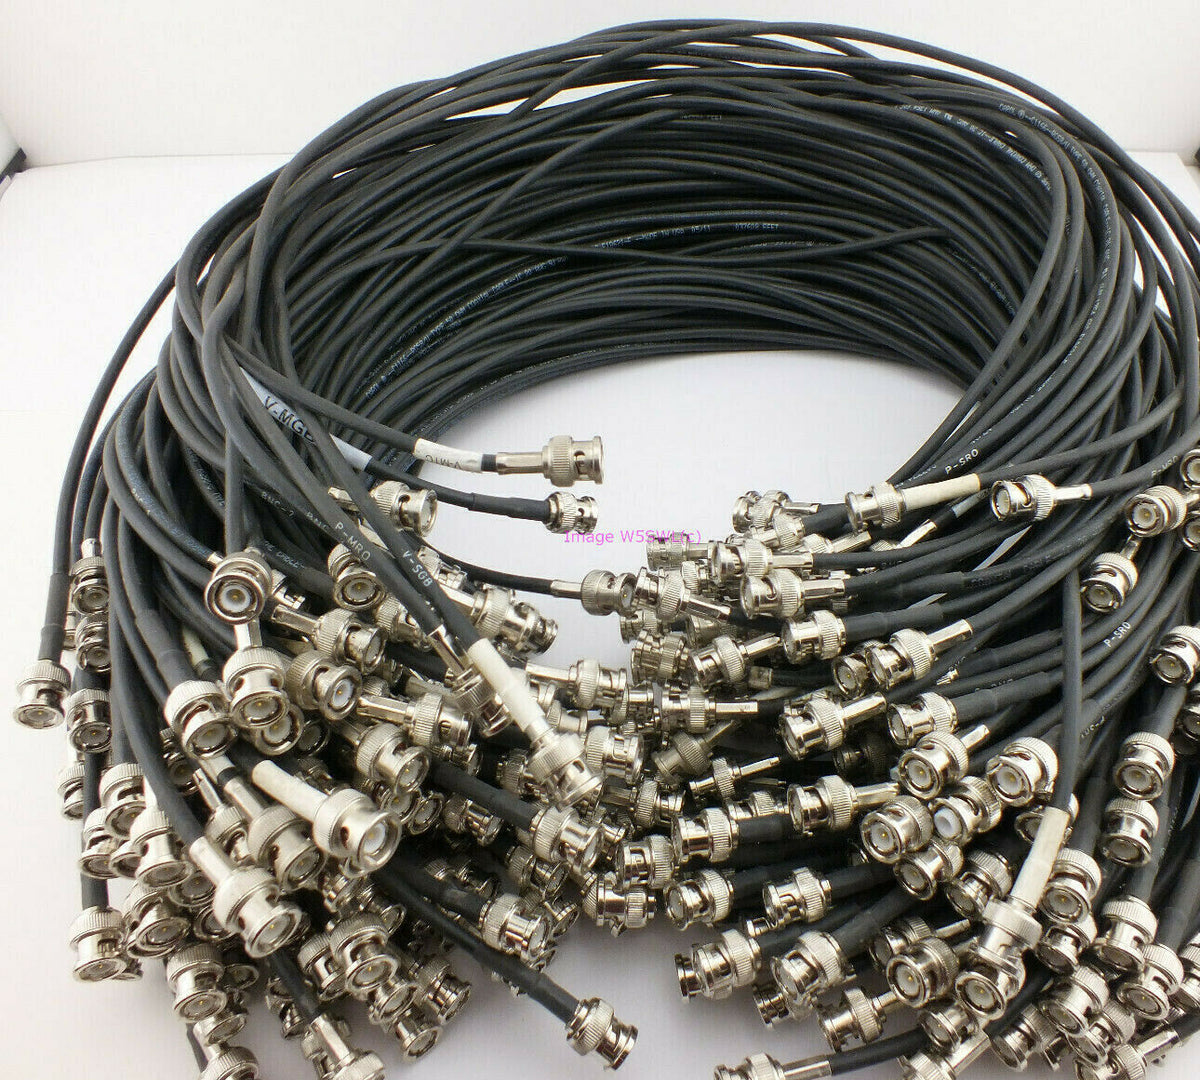 1 BNC Male Jumper approx 36" (3ft) High Quality RG58/U Cable - Dave's Hobby Shop by W5SWL